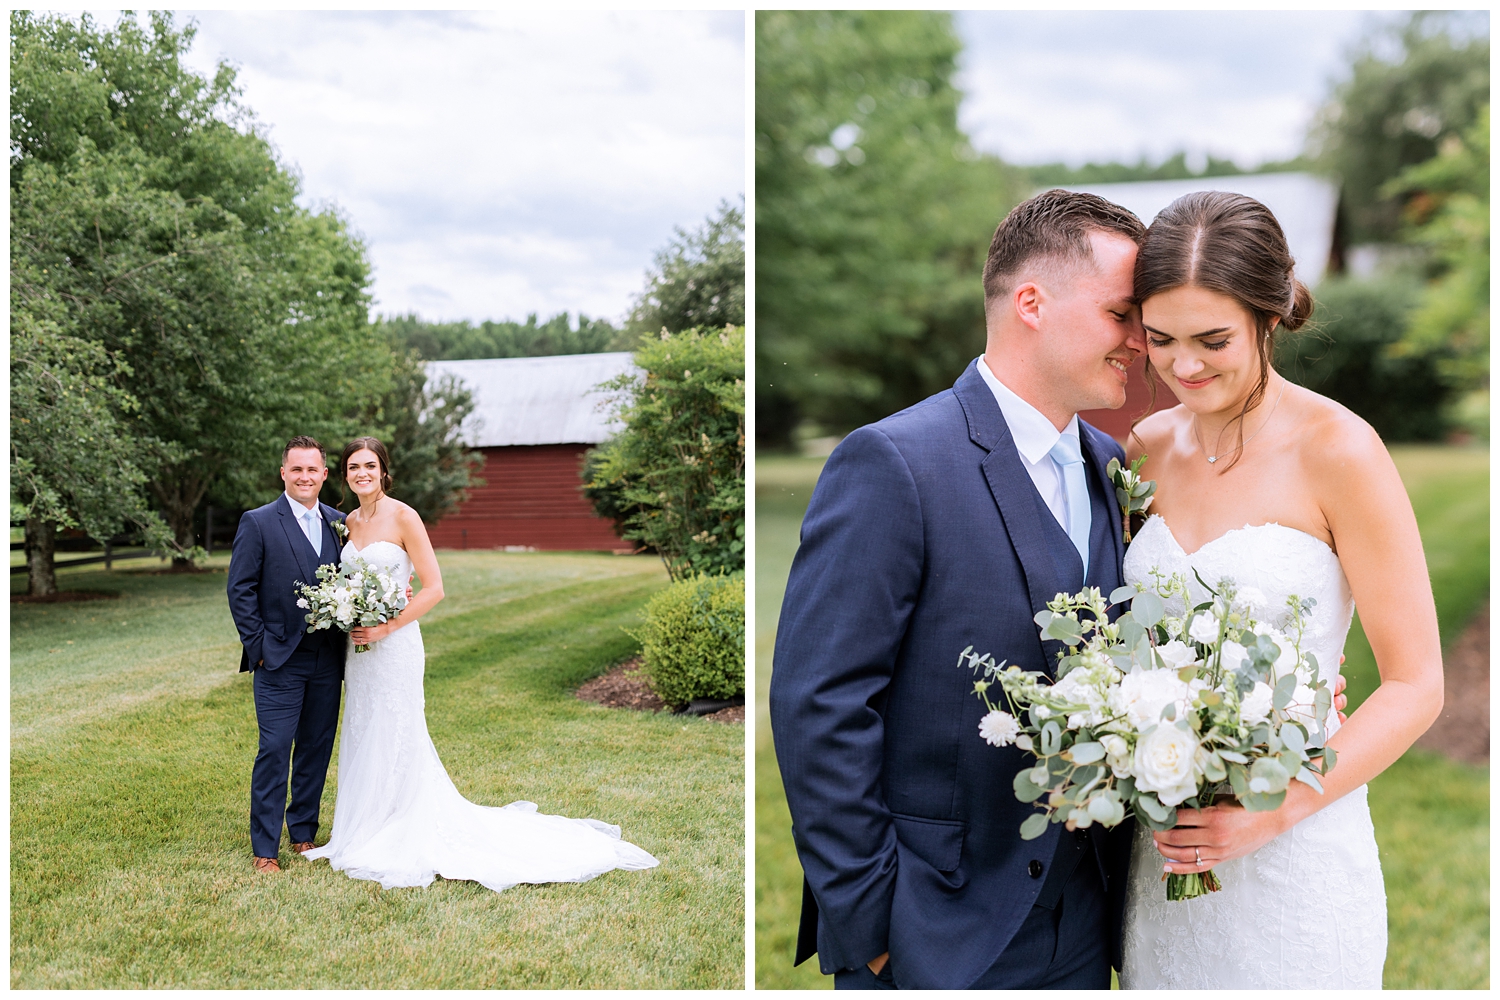 First look with bride and groom at Richmond Farm Wedding